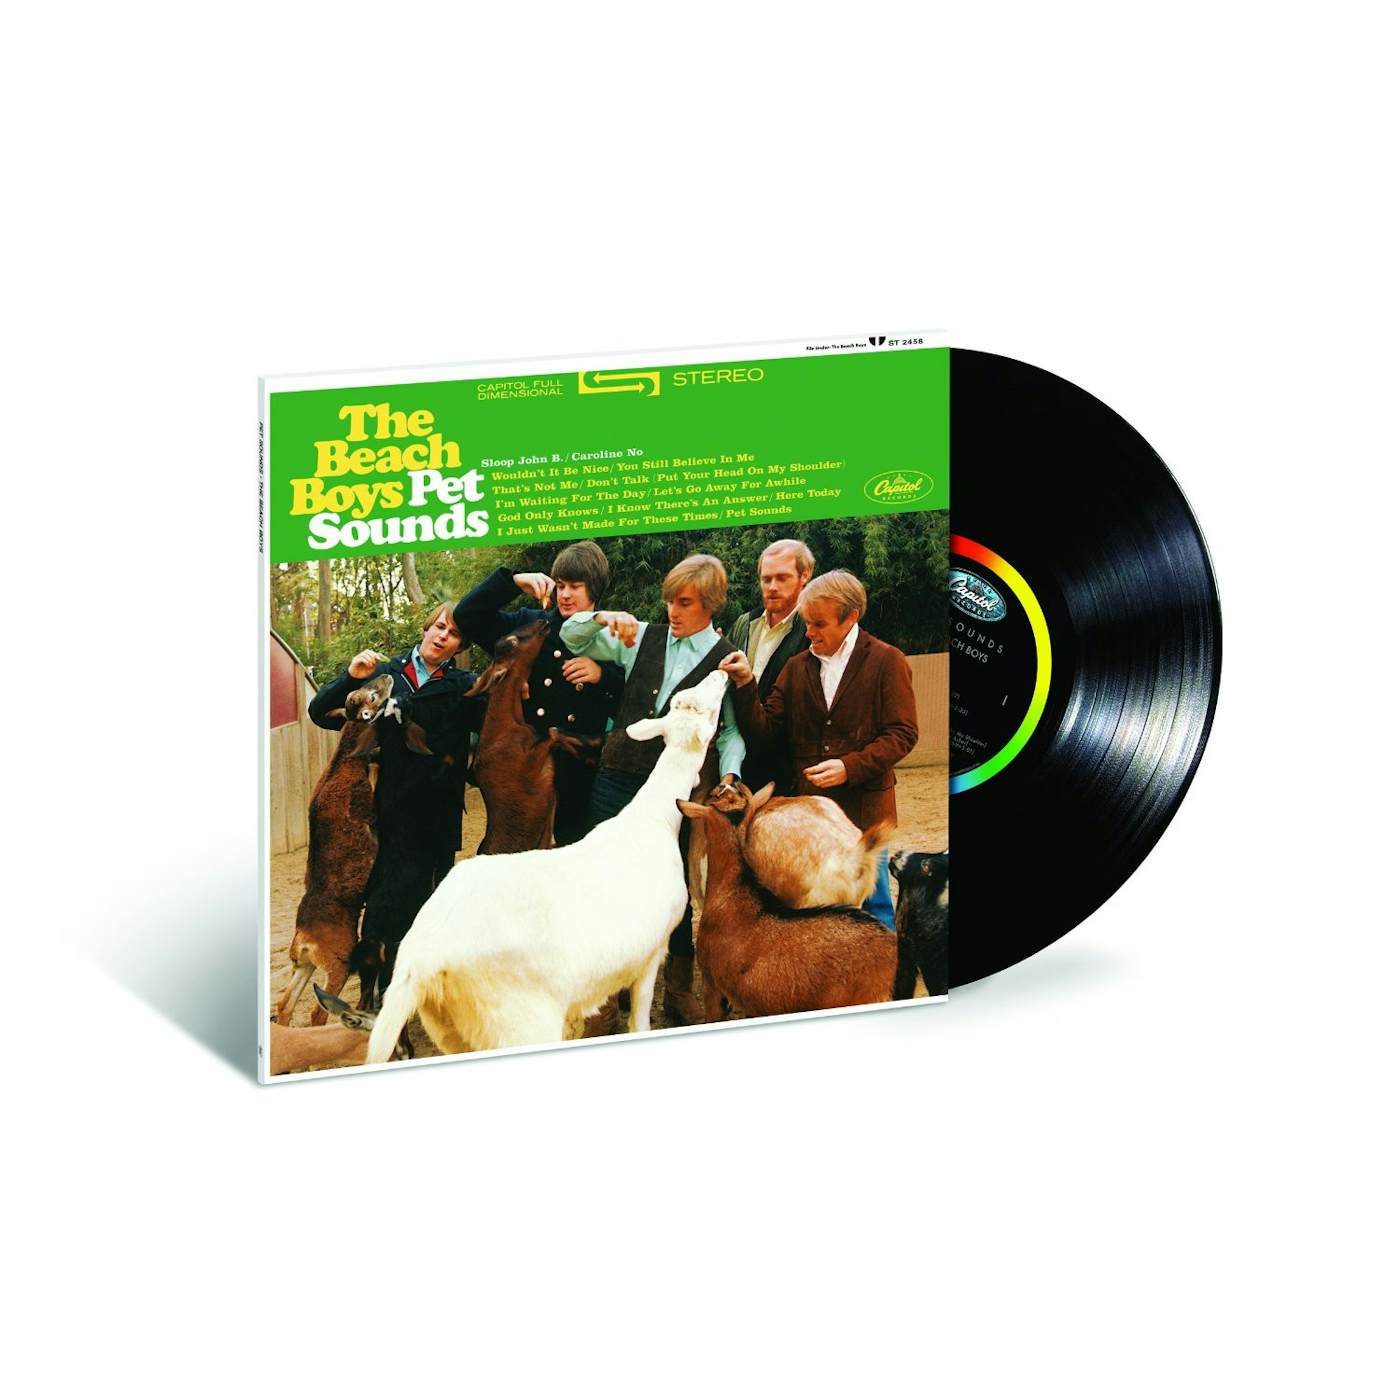 The Beach Boys Pet Sounds (Limited/180g/Stereo) Vinyl Record